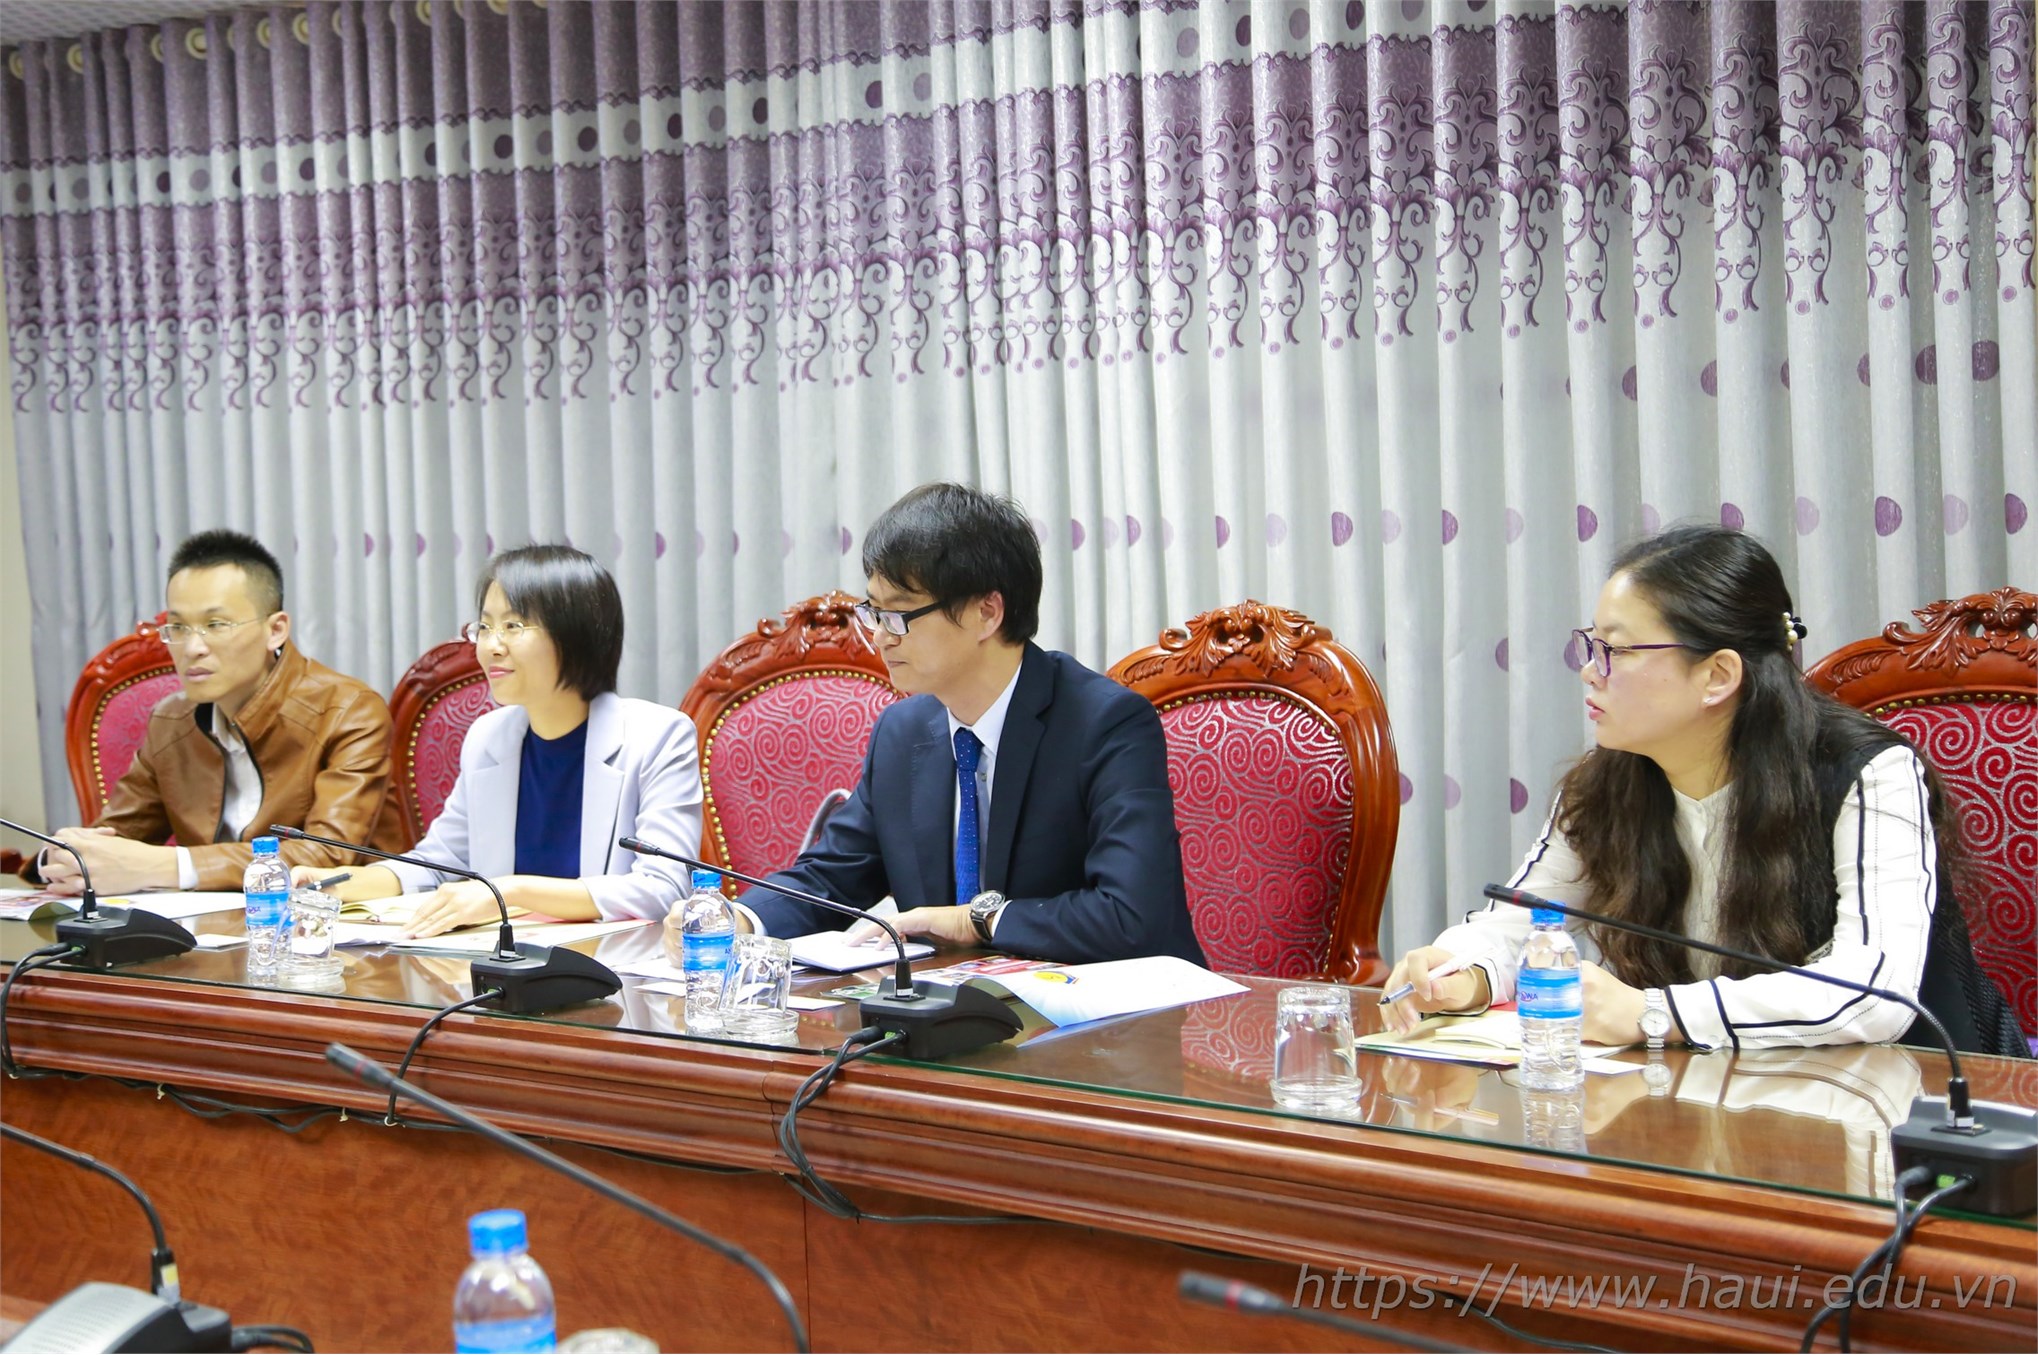 Hanoi University of Industry cooperates with Xiangsihu College, China